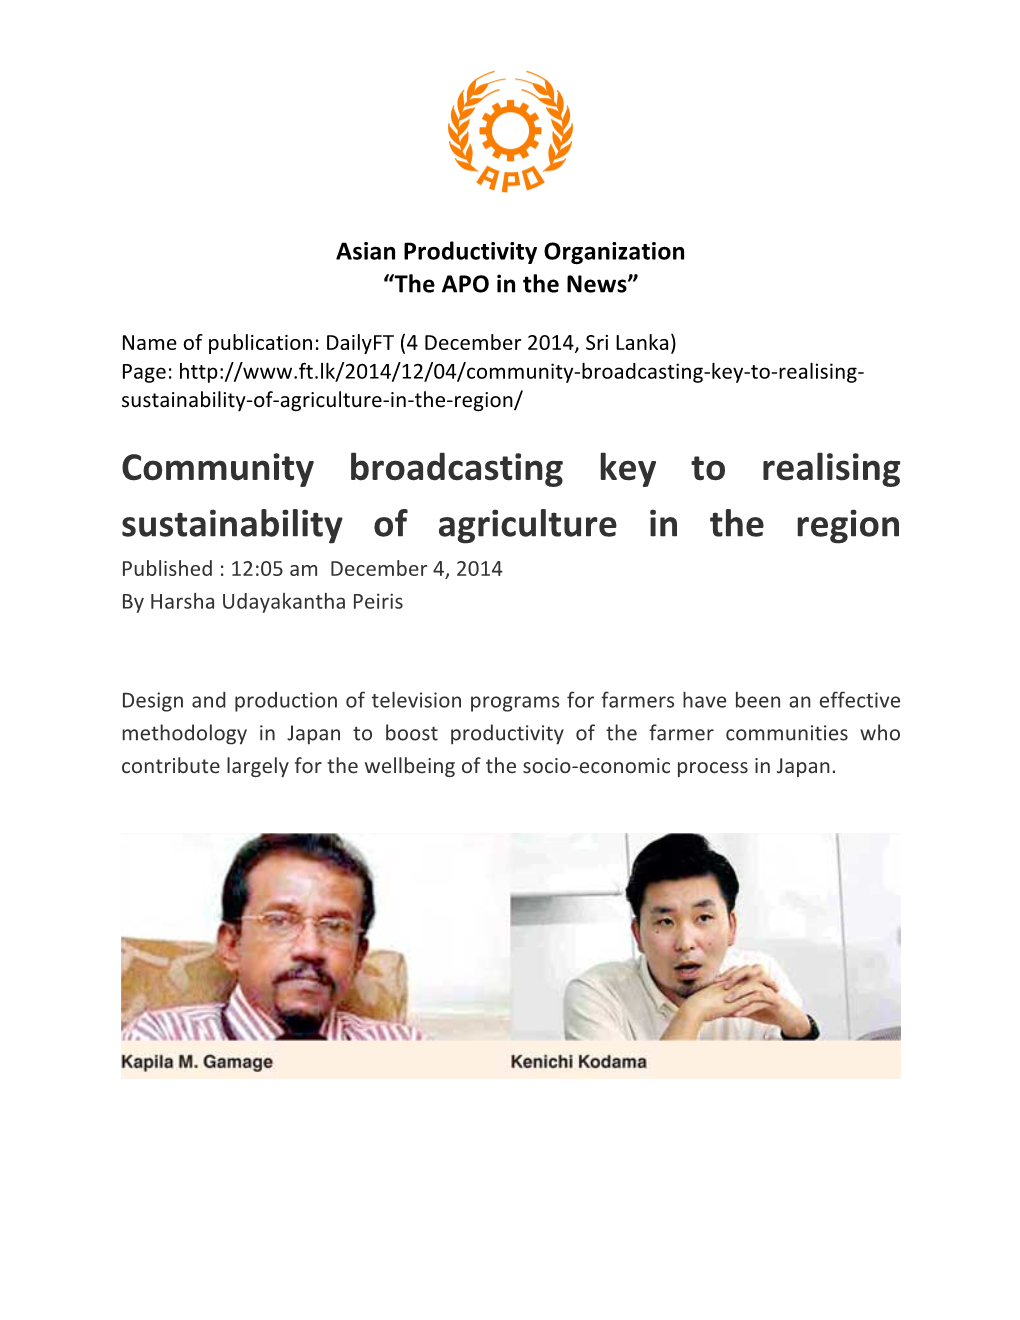 Community Broadcasting Key to Realising Sustainability of Agriculture in the Region Published : 12:05 Am December 4, 2014 by Harsha Udayakantha Peiris